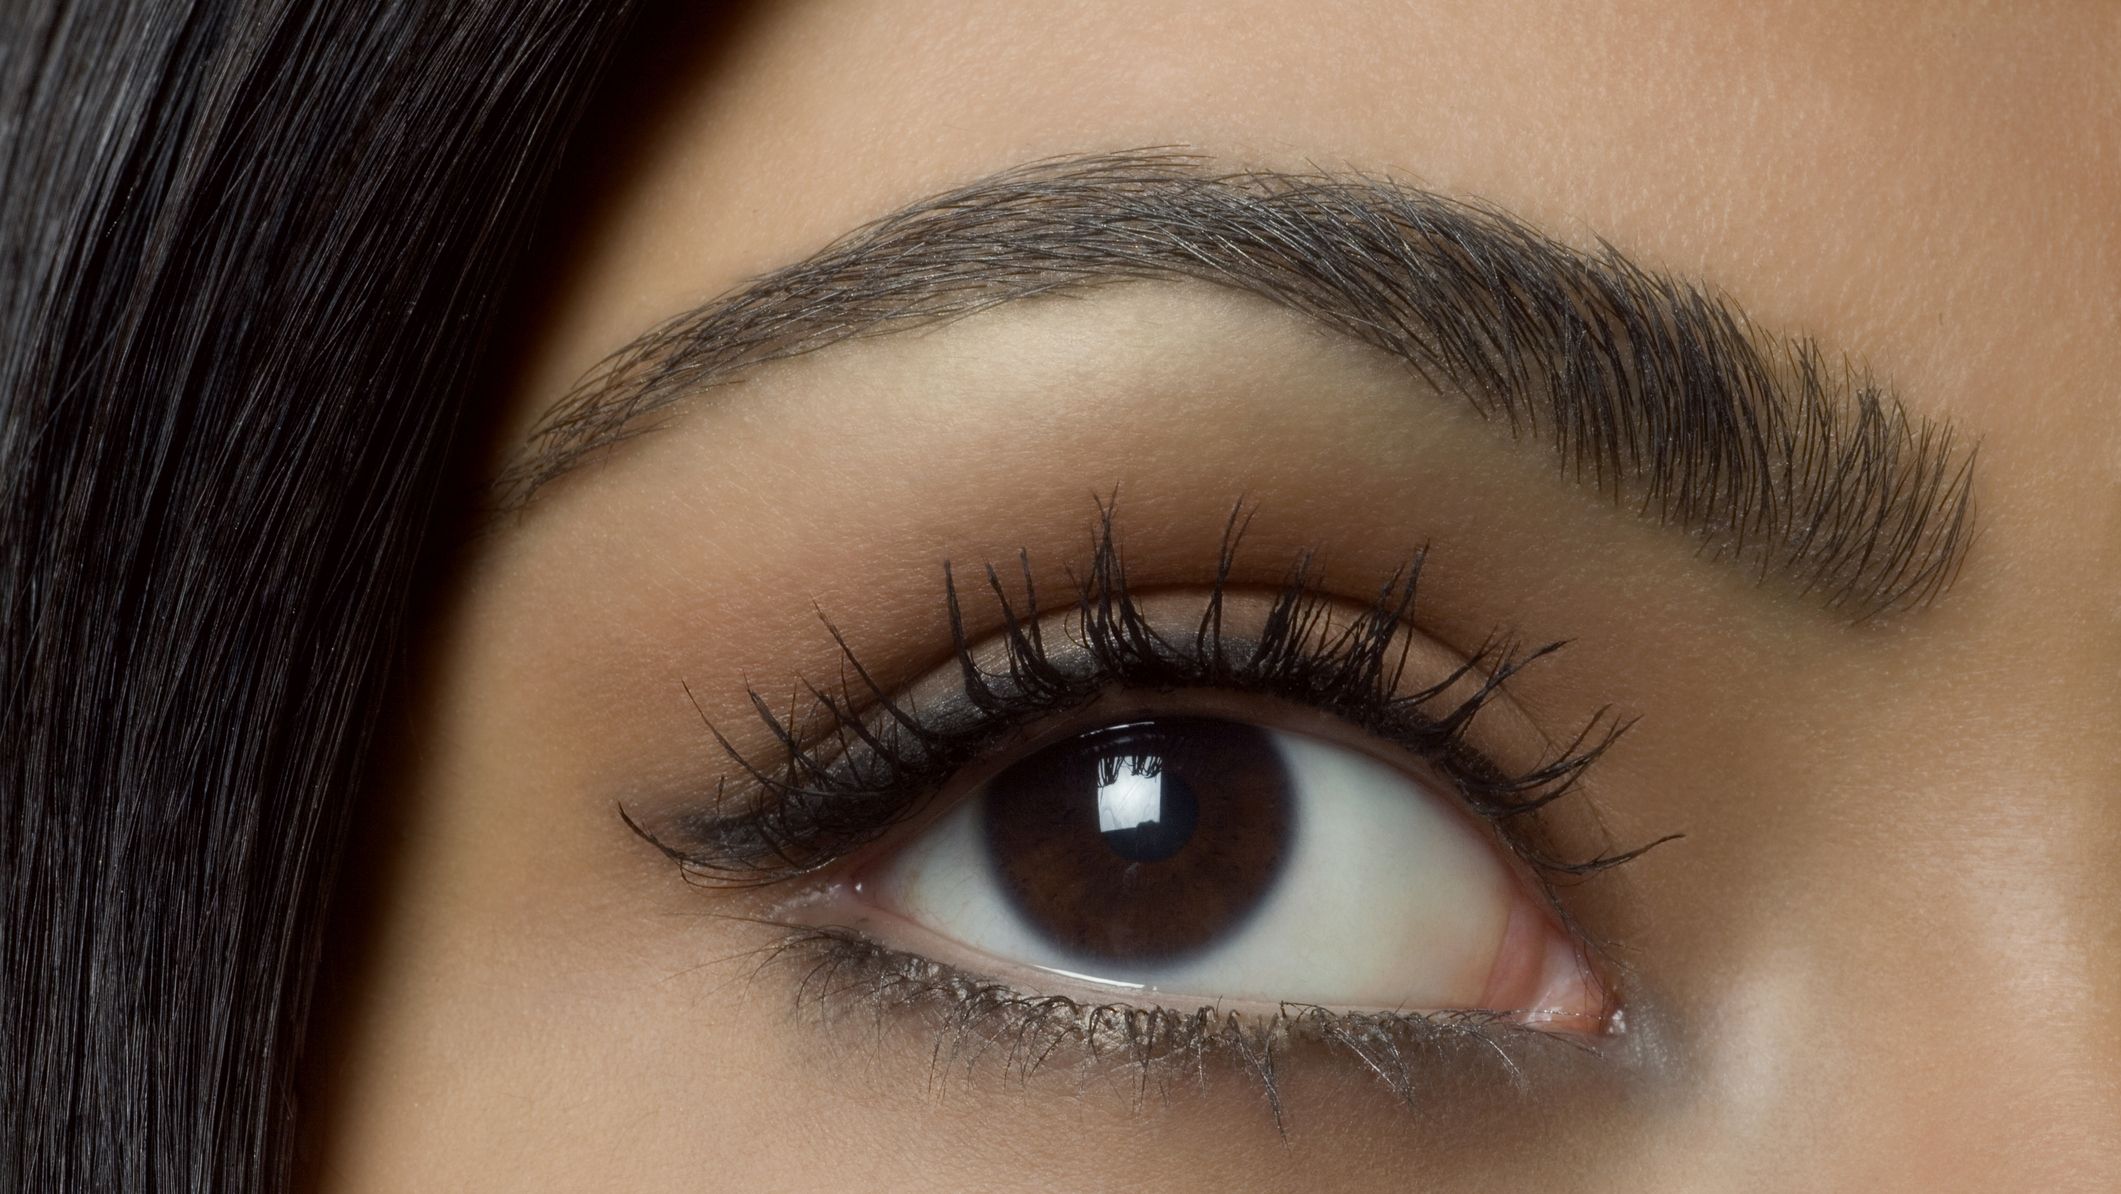 Eyebrow Threading and Covid-19: Changes to Expect During Your Next